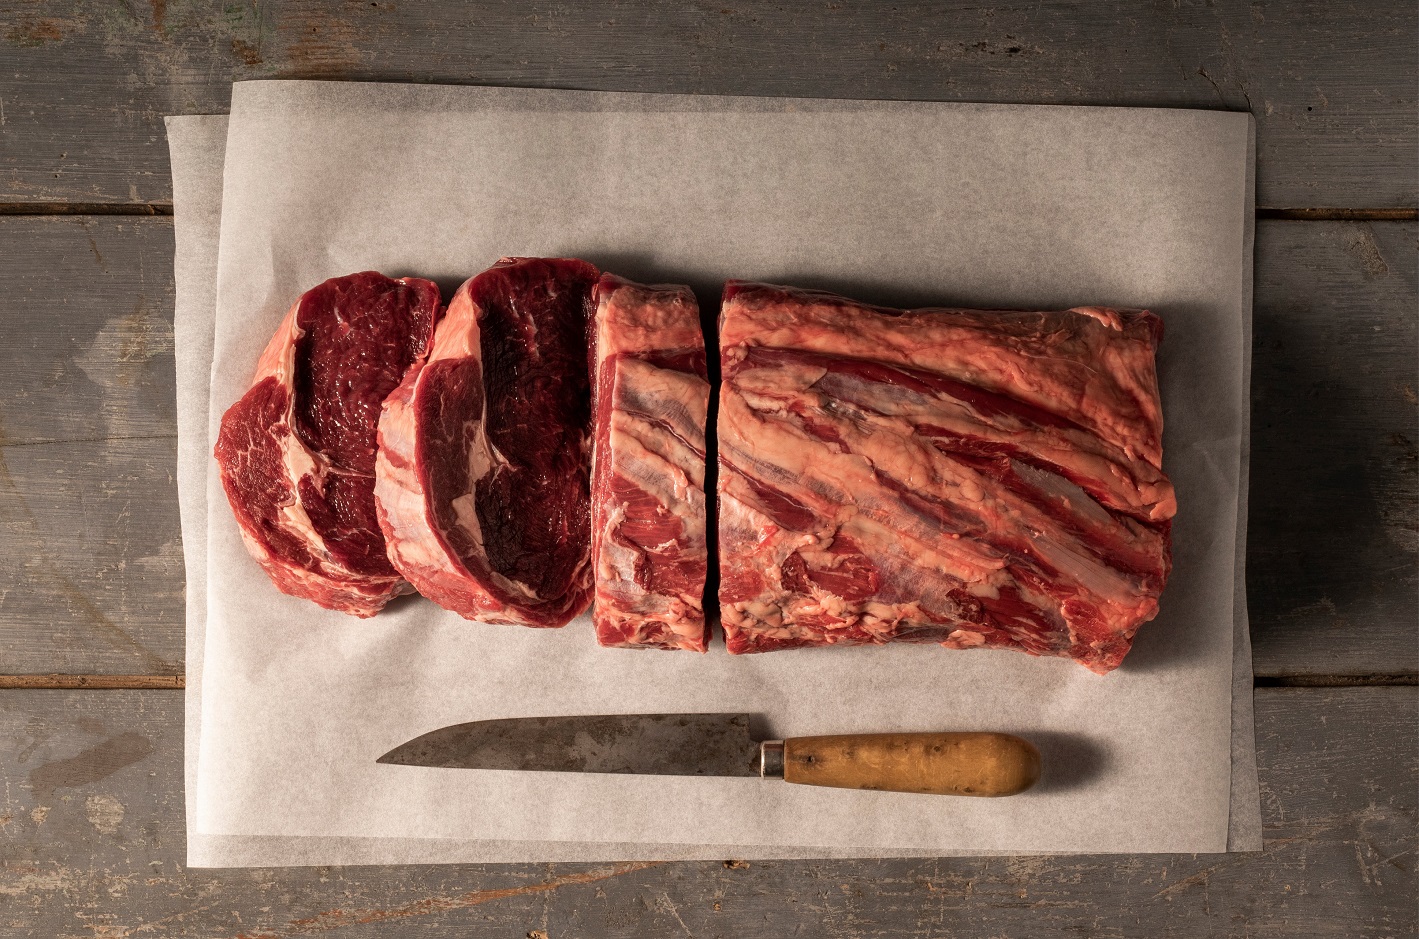 Pure South’s Handpicked Beef 55-day Aged Ribeye was named co-Paddock Champion.